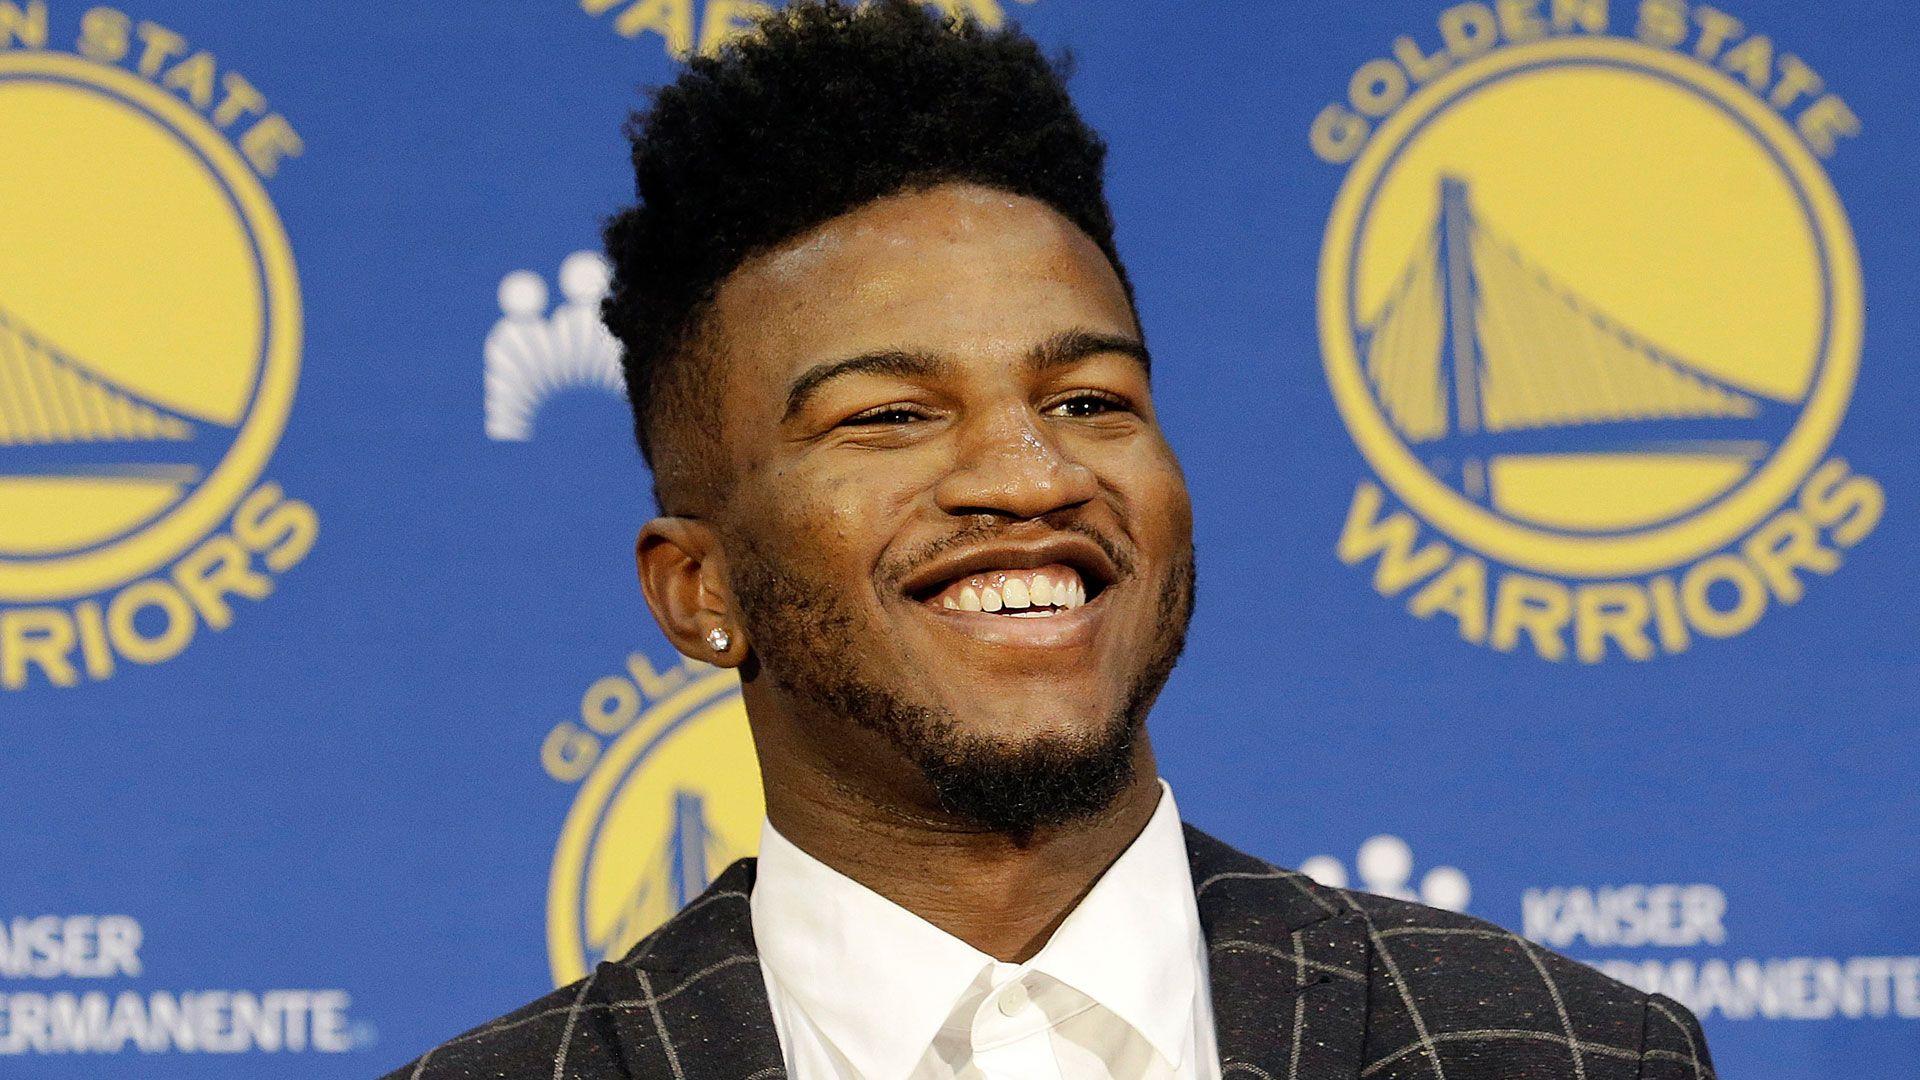 Most famous person to call Warriors draft pick Jordan Bell is